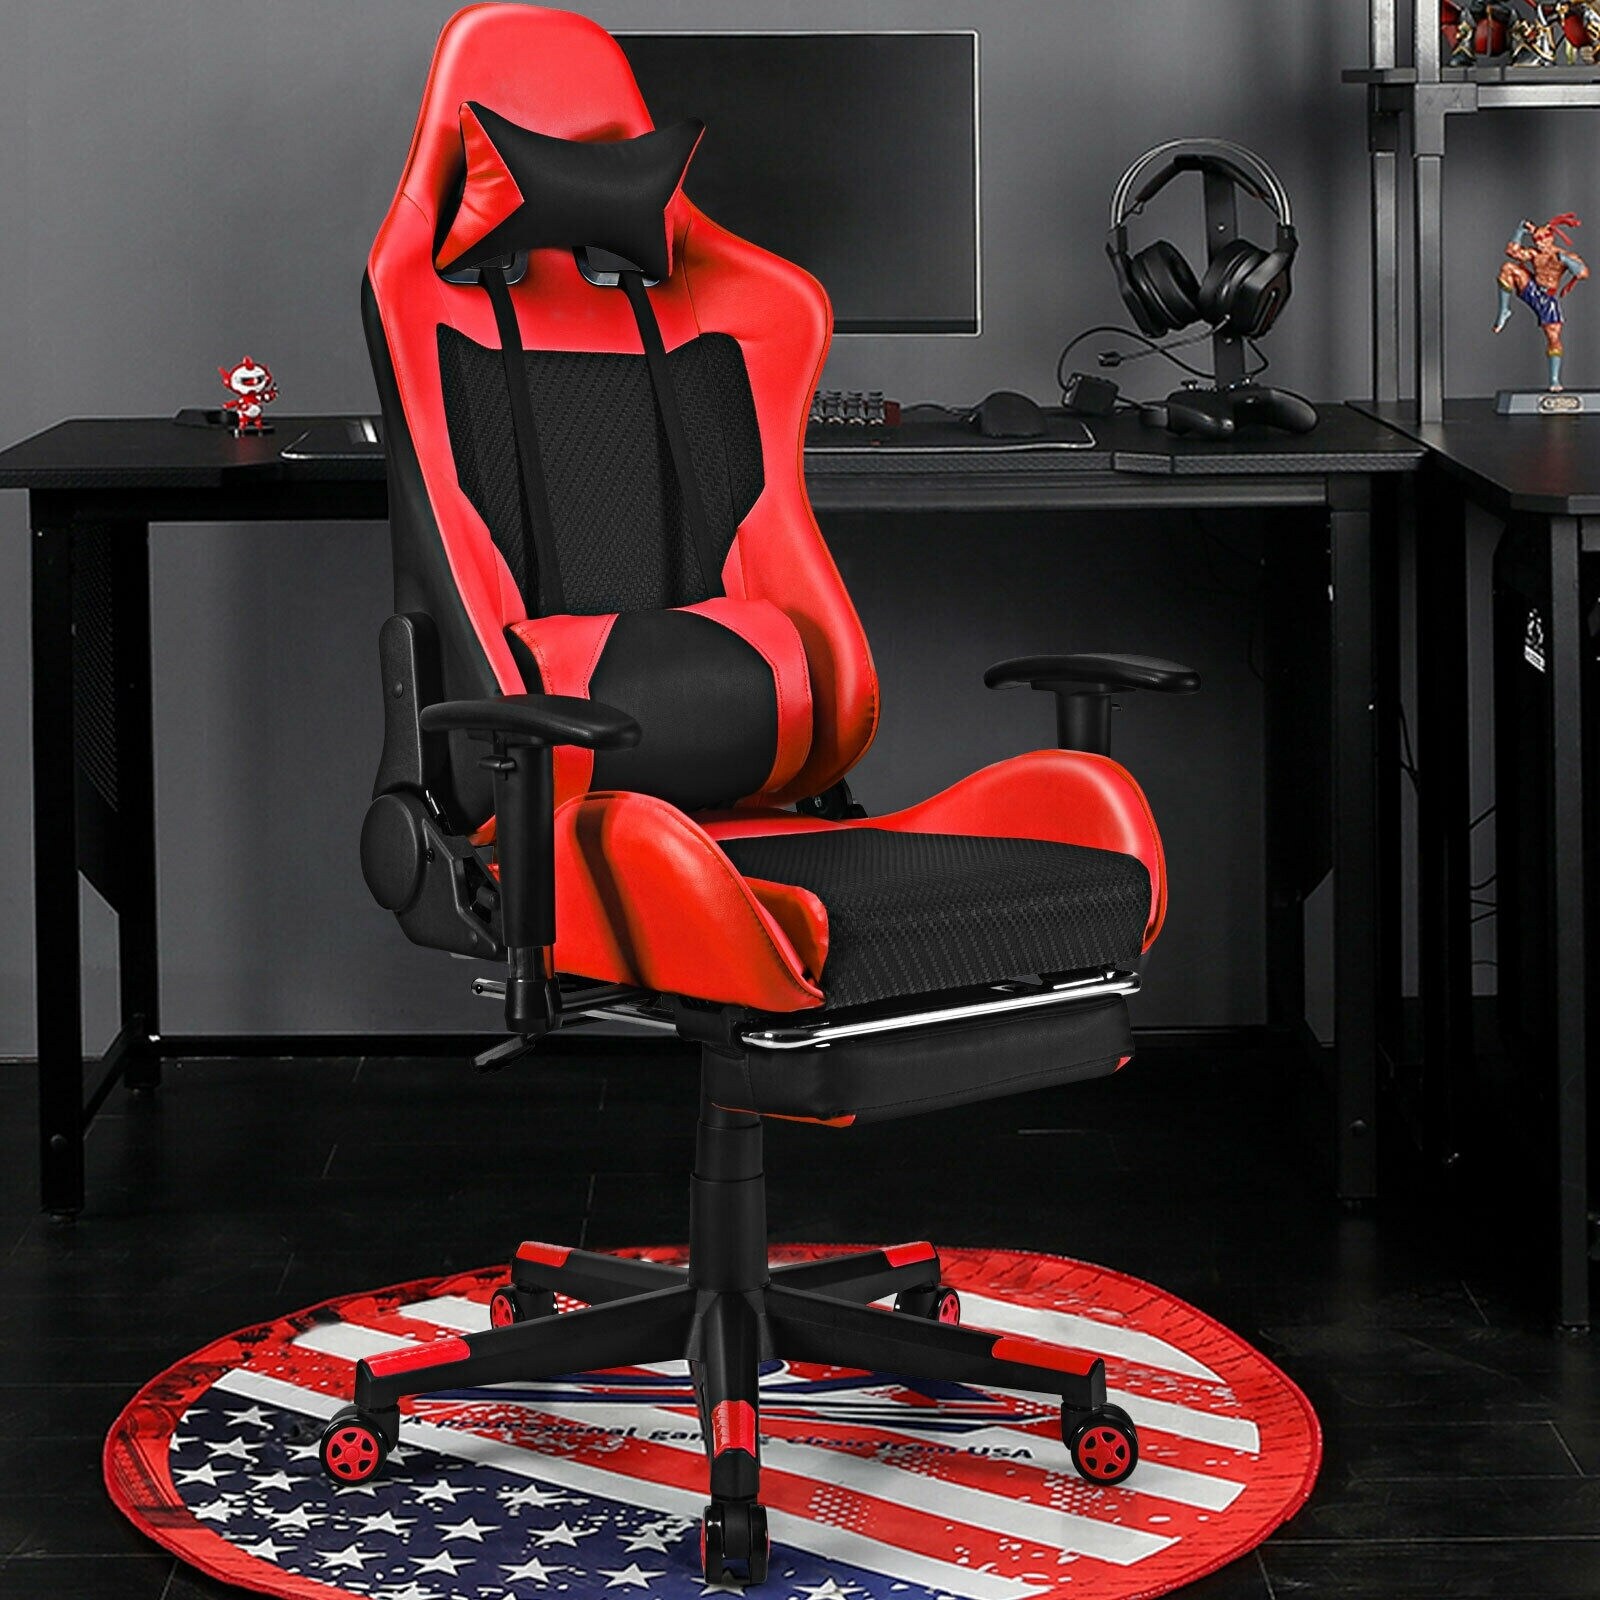 https://ak1.ostkcdn.com/images/products/is/images/direct/5e82c8ddb6f1d80b5cd1c7291e69e30a1e5e74a4/PU-Leather-Gaming-Chair-with-USB-Massage-Lumbar-Pillow-and-Footrest-Red.jpg